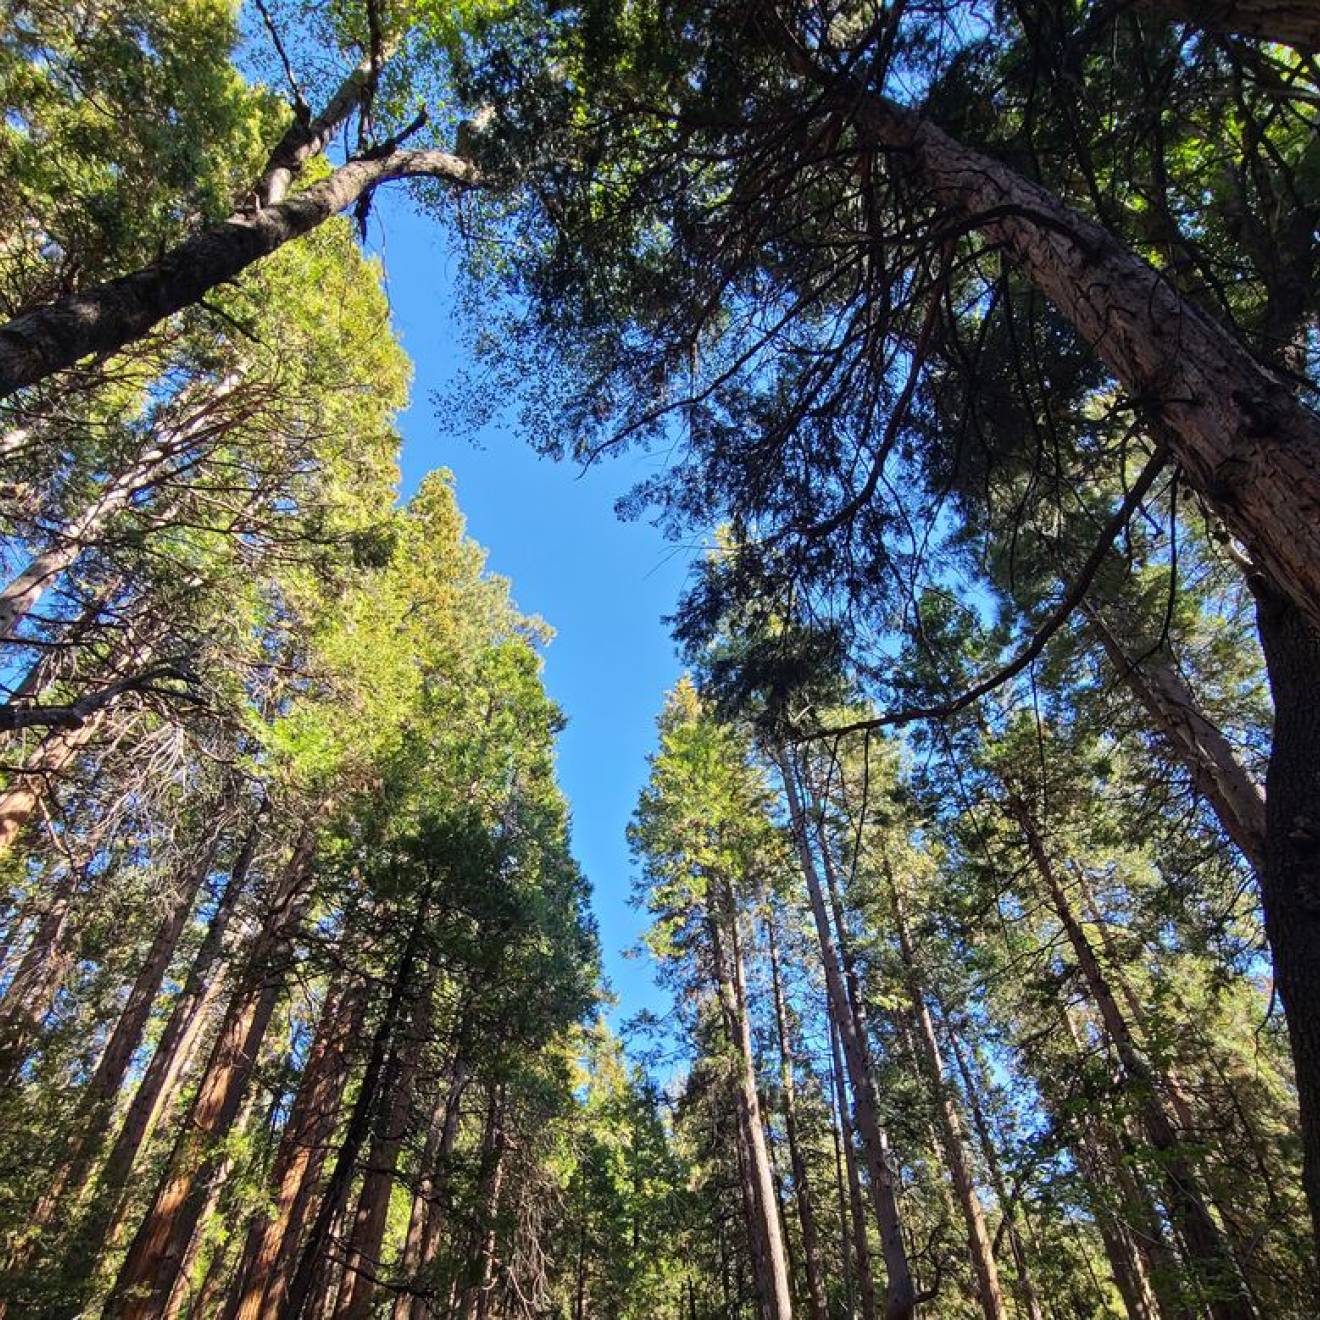 Looking up into a forest canopy against a blue sky